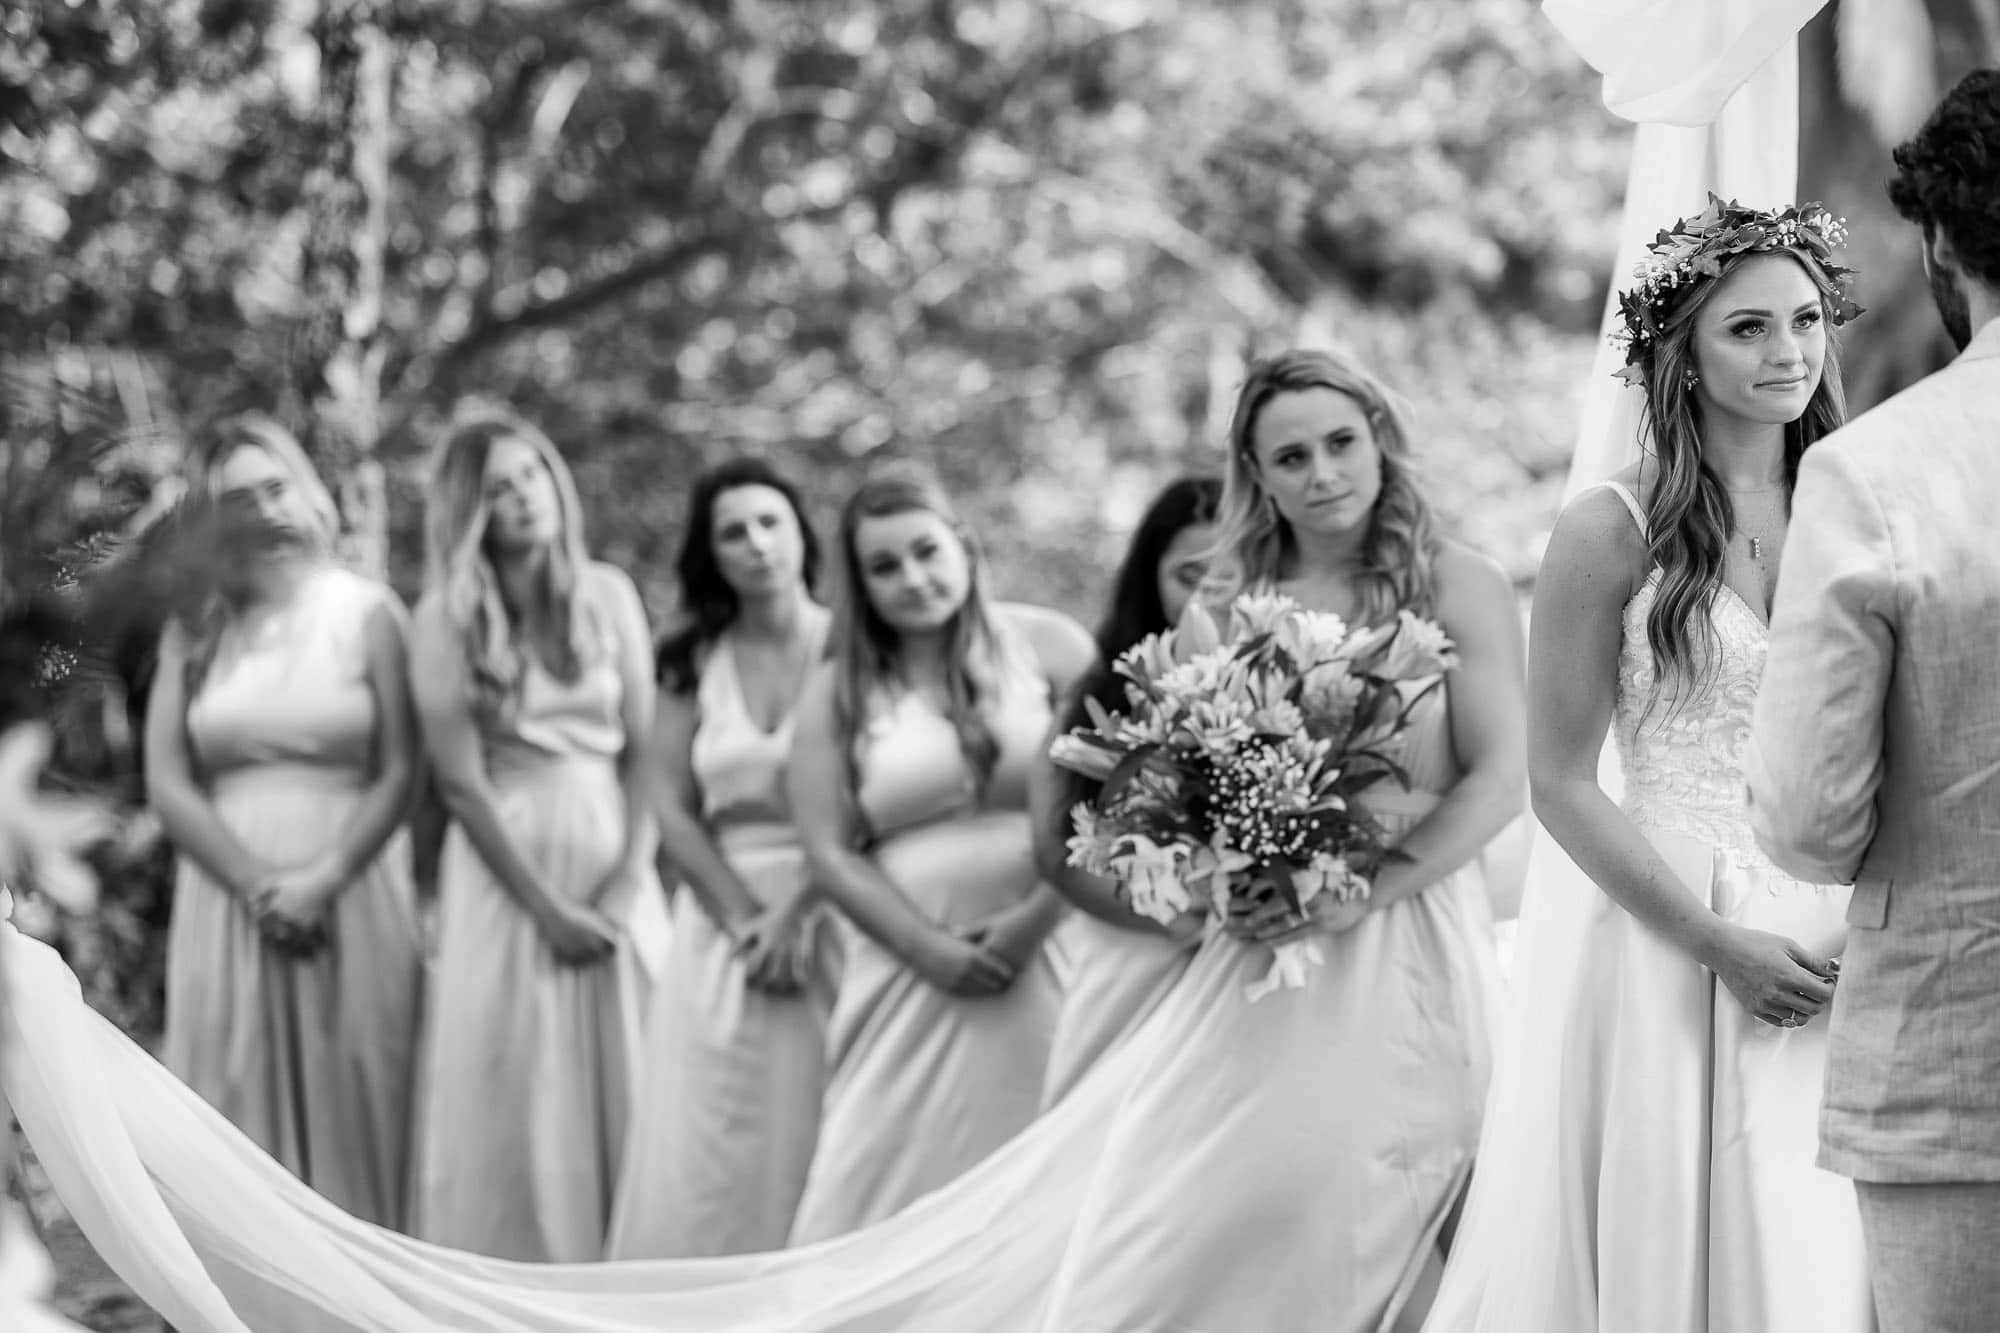 The bride and bridesmaids during the ceremony